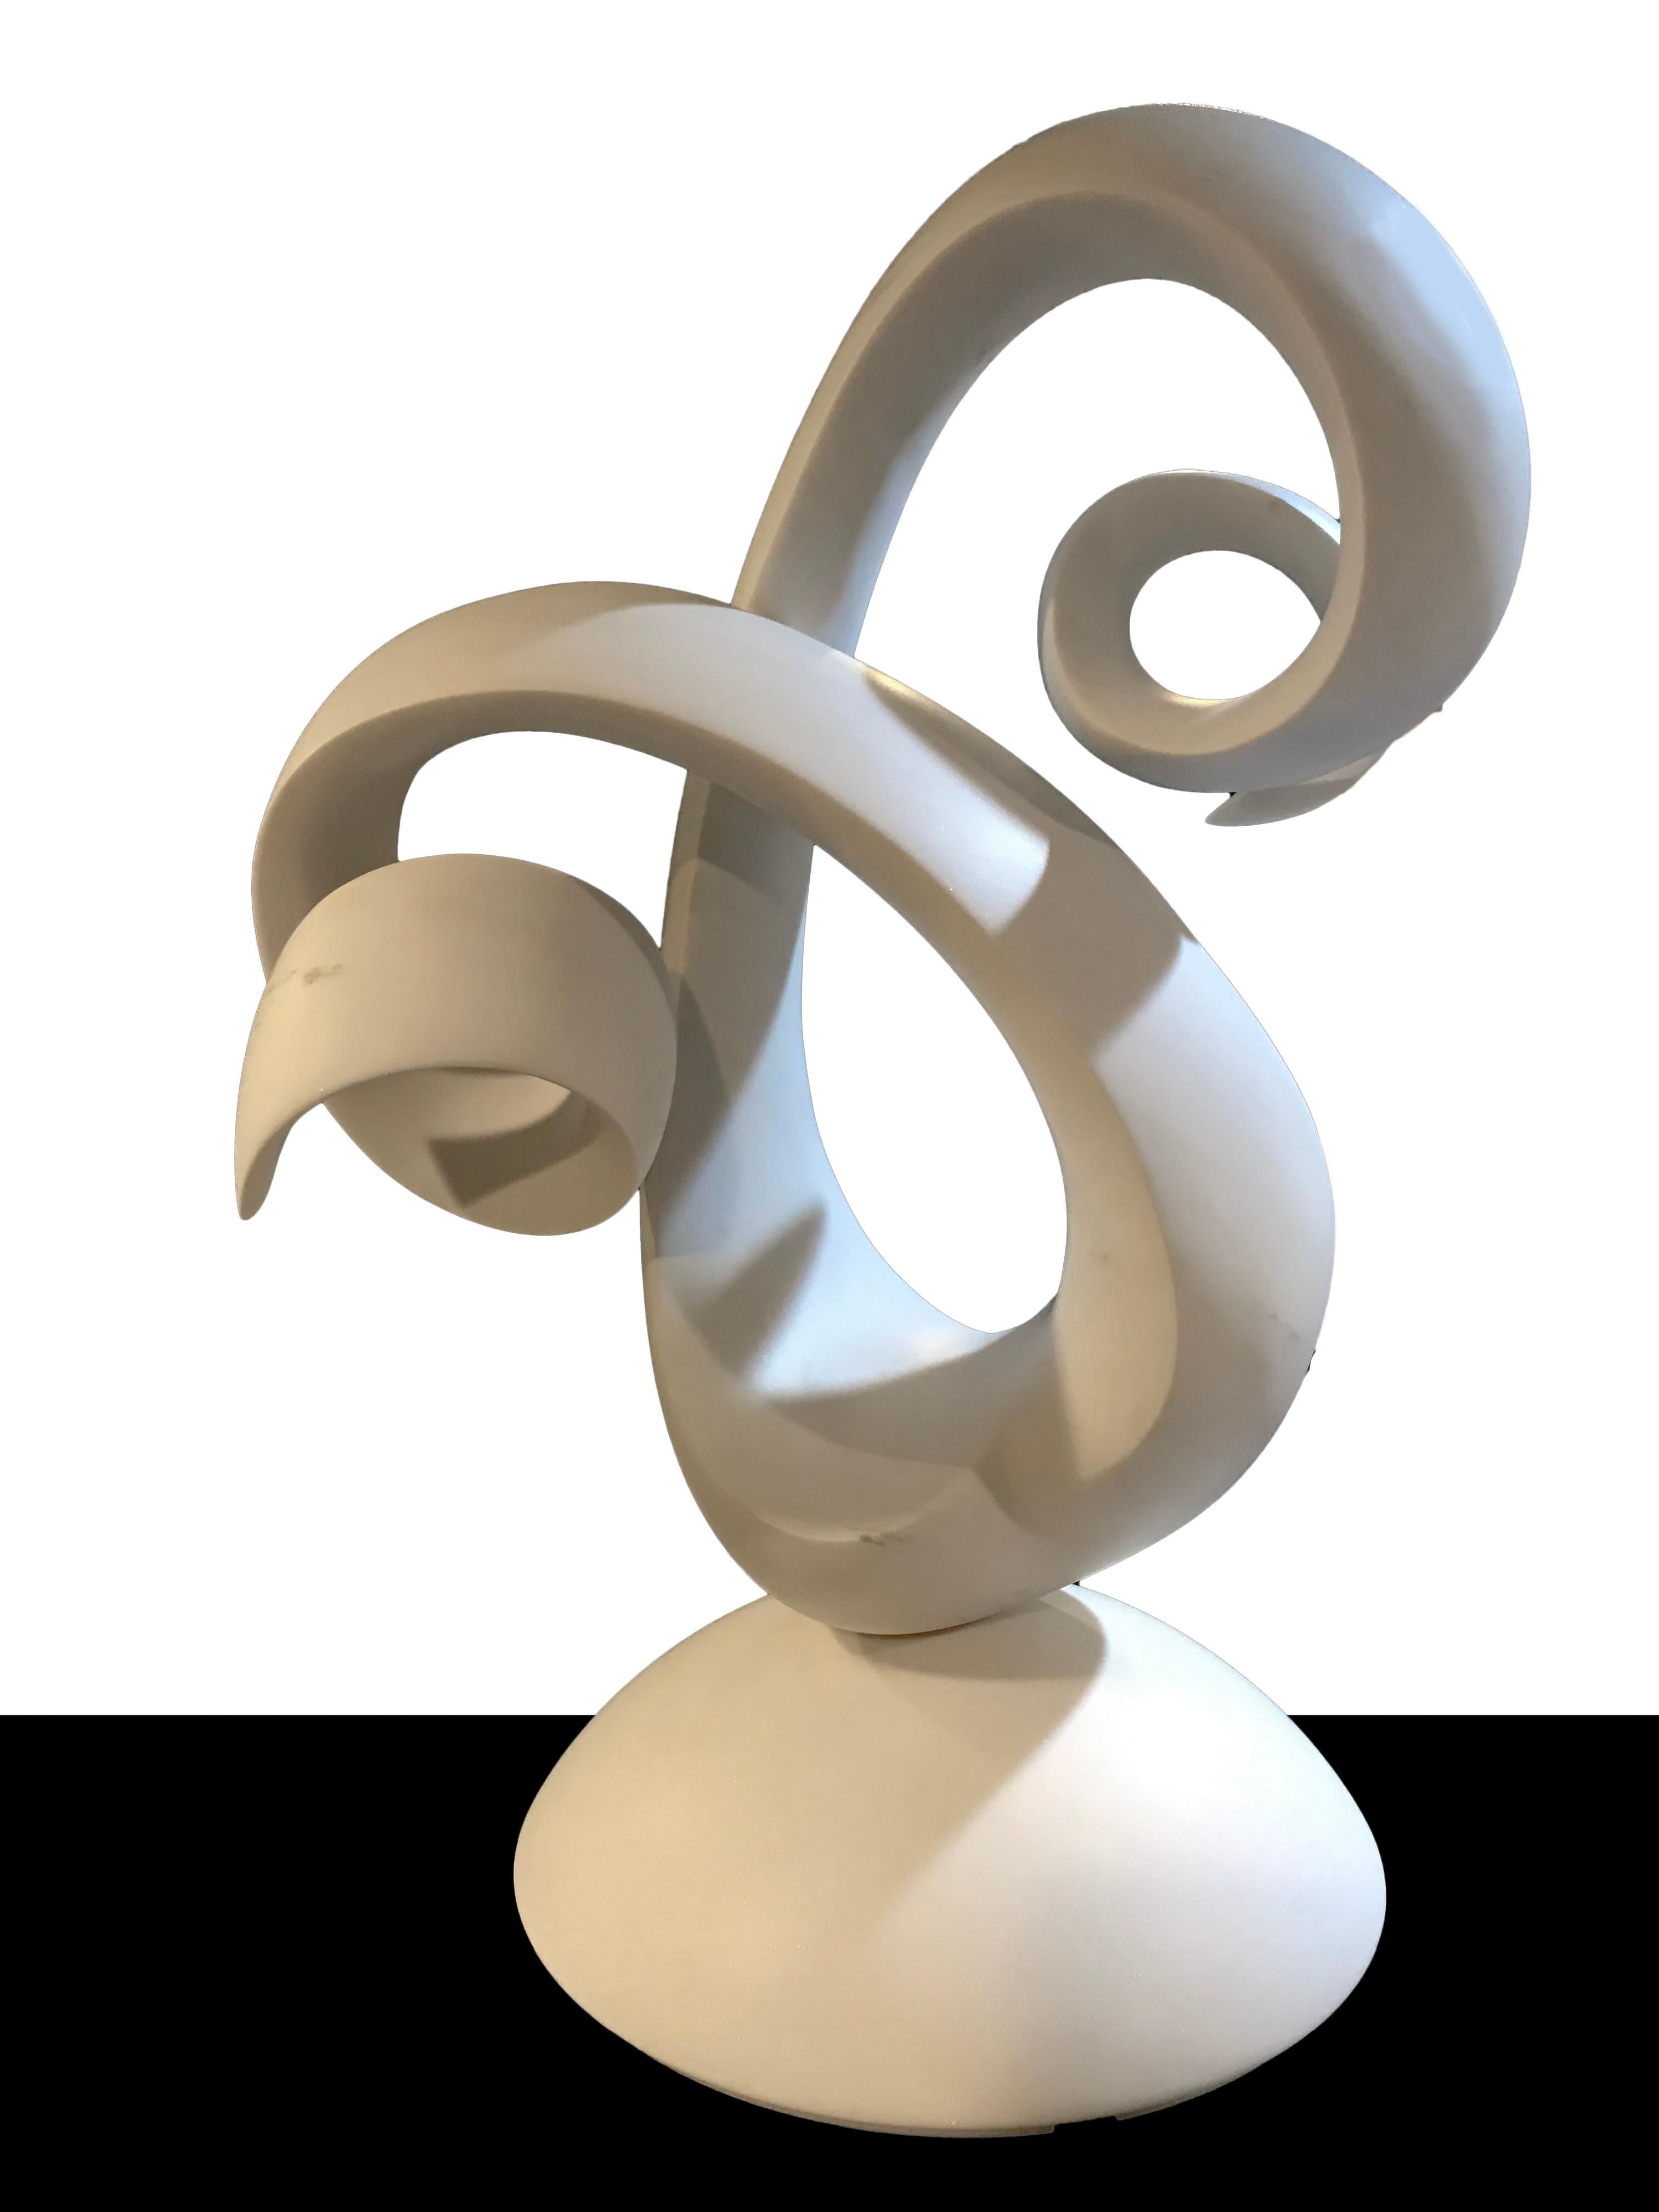 marble abstract sculpture